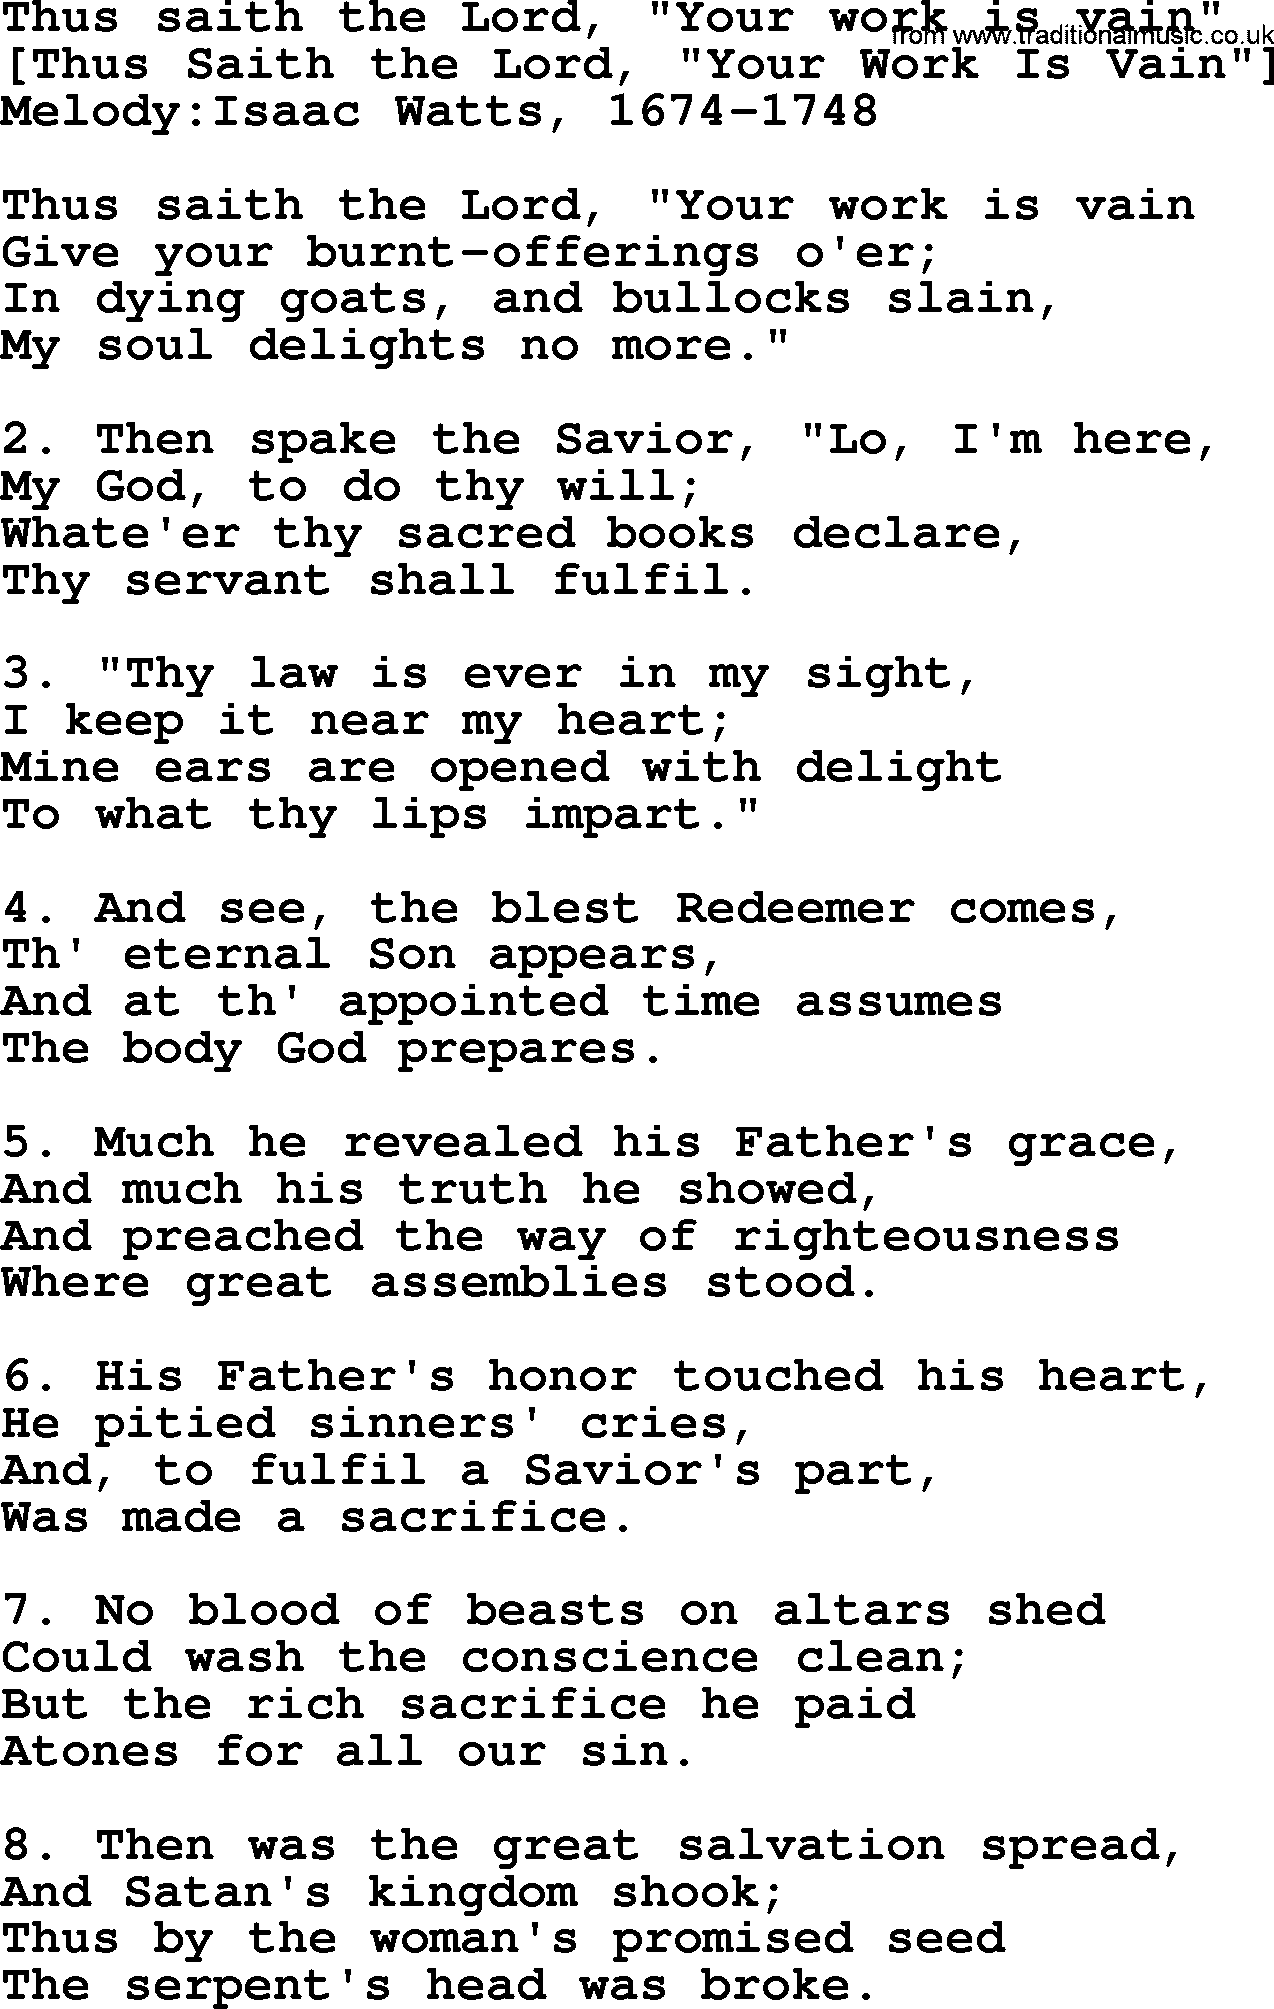 Old English Song: Thus Saith The Lord, Your Work Is Vain lyrics